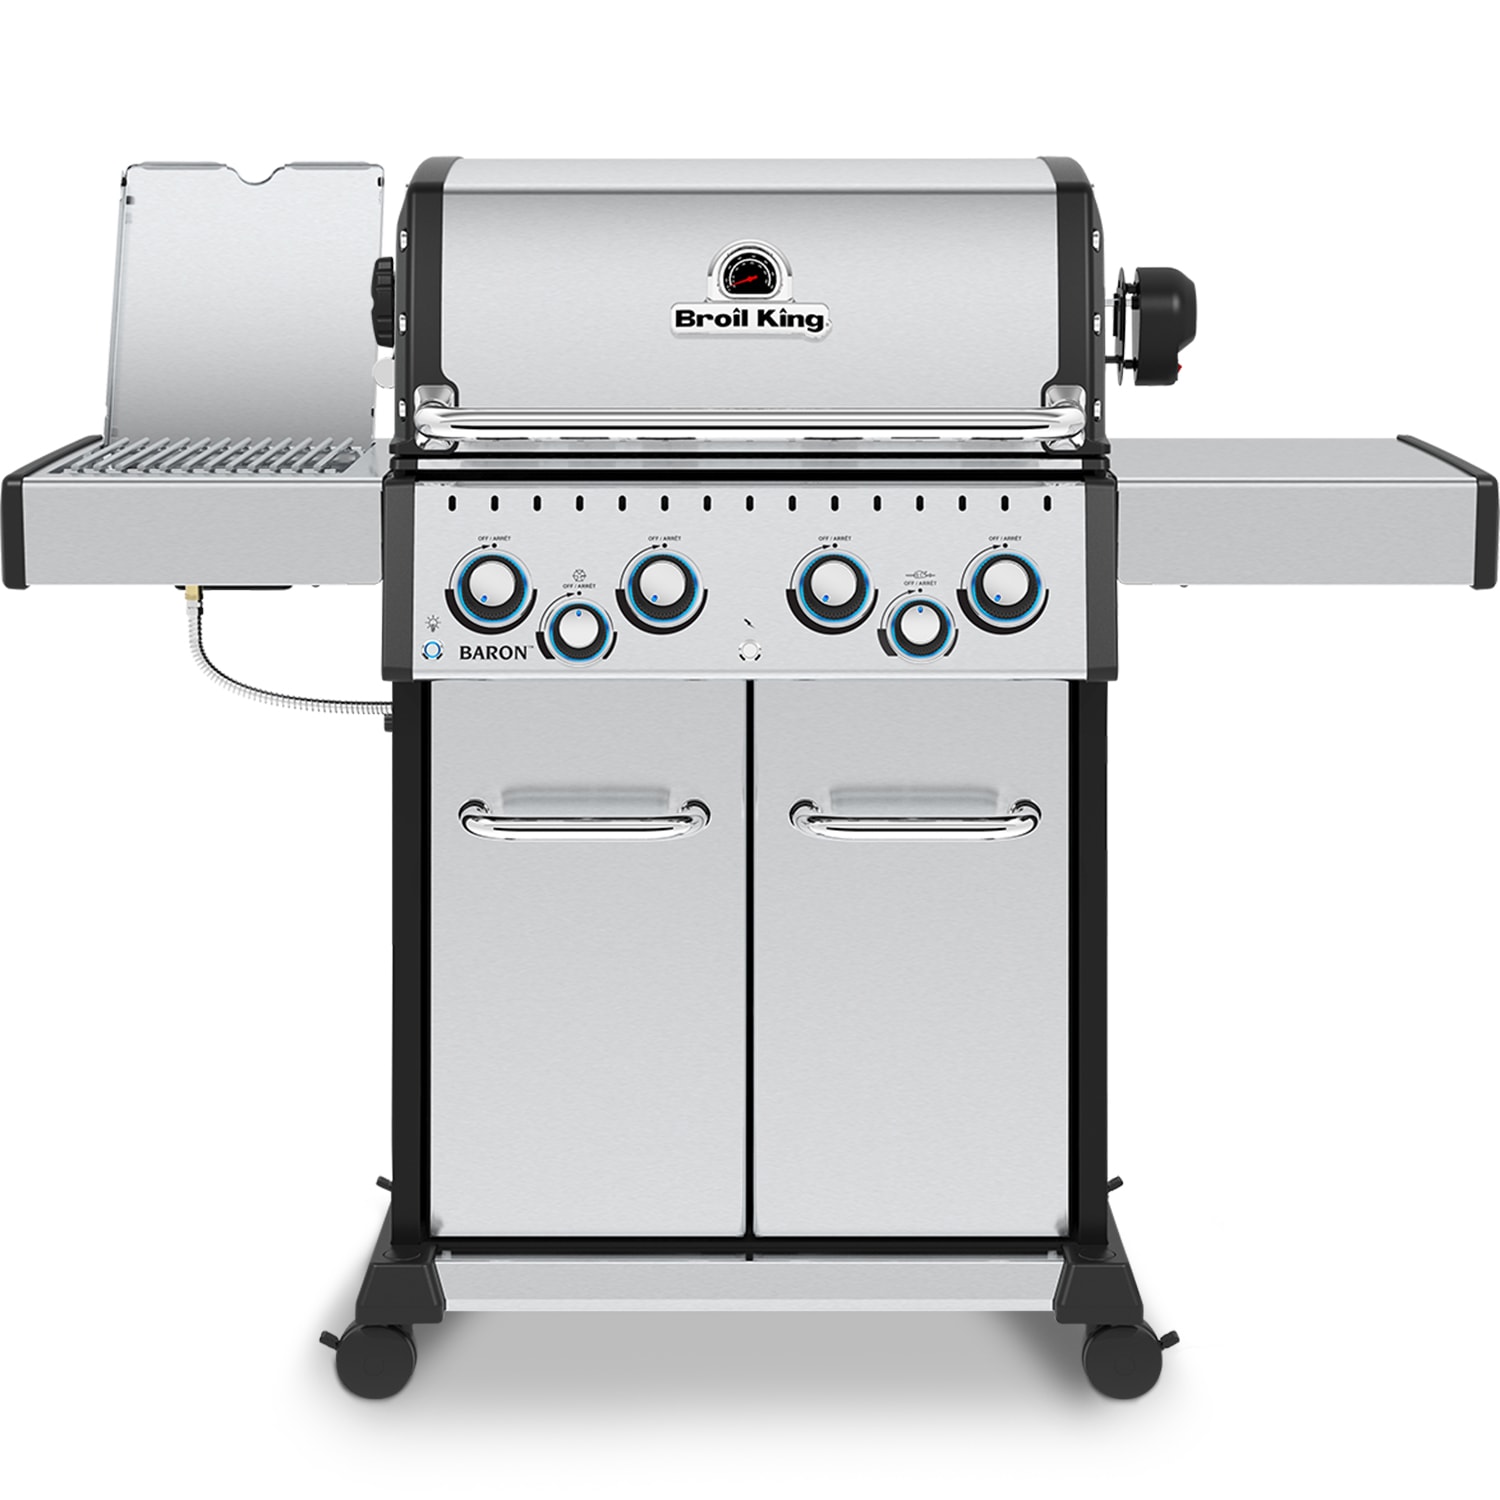 Broil King Baron S 440 Pro IR Grill, Natural Gas